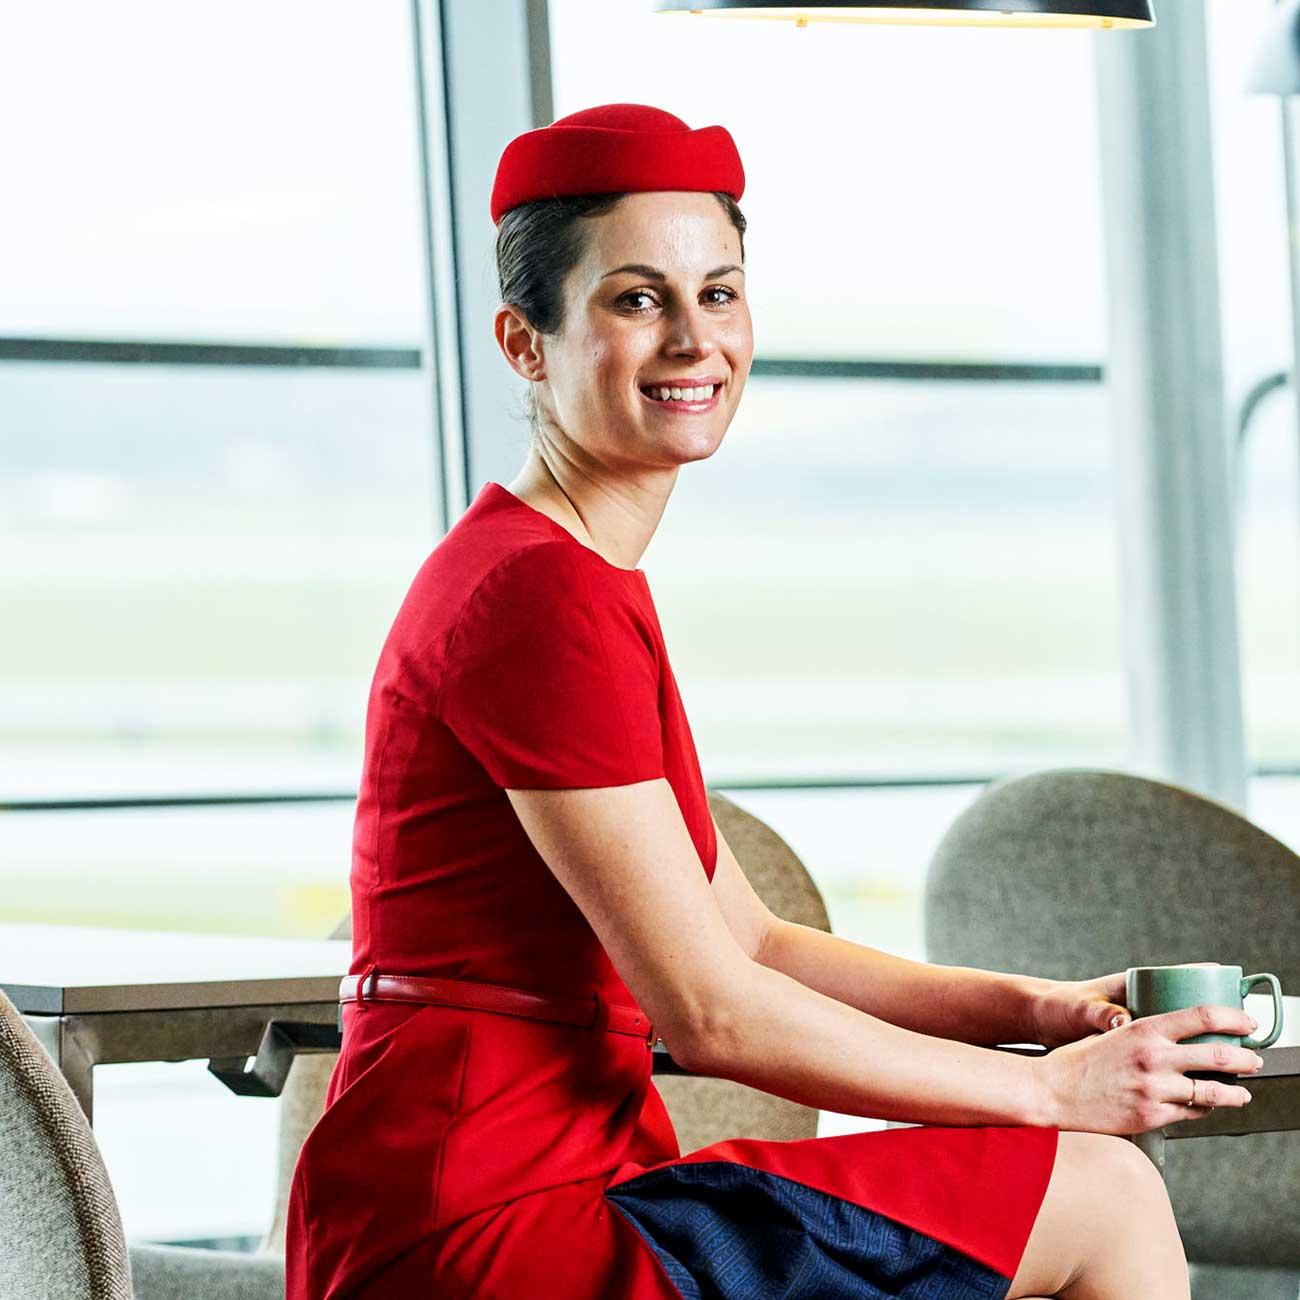 Red Cabin crew hat